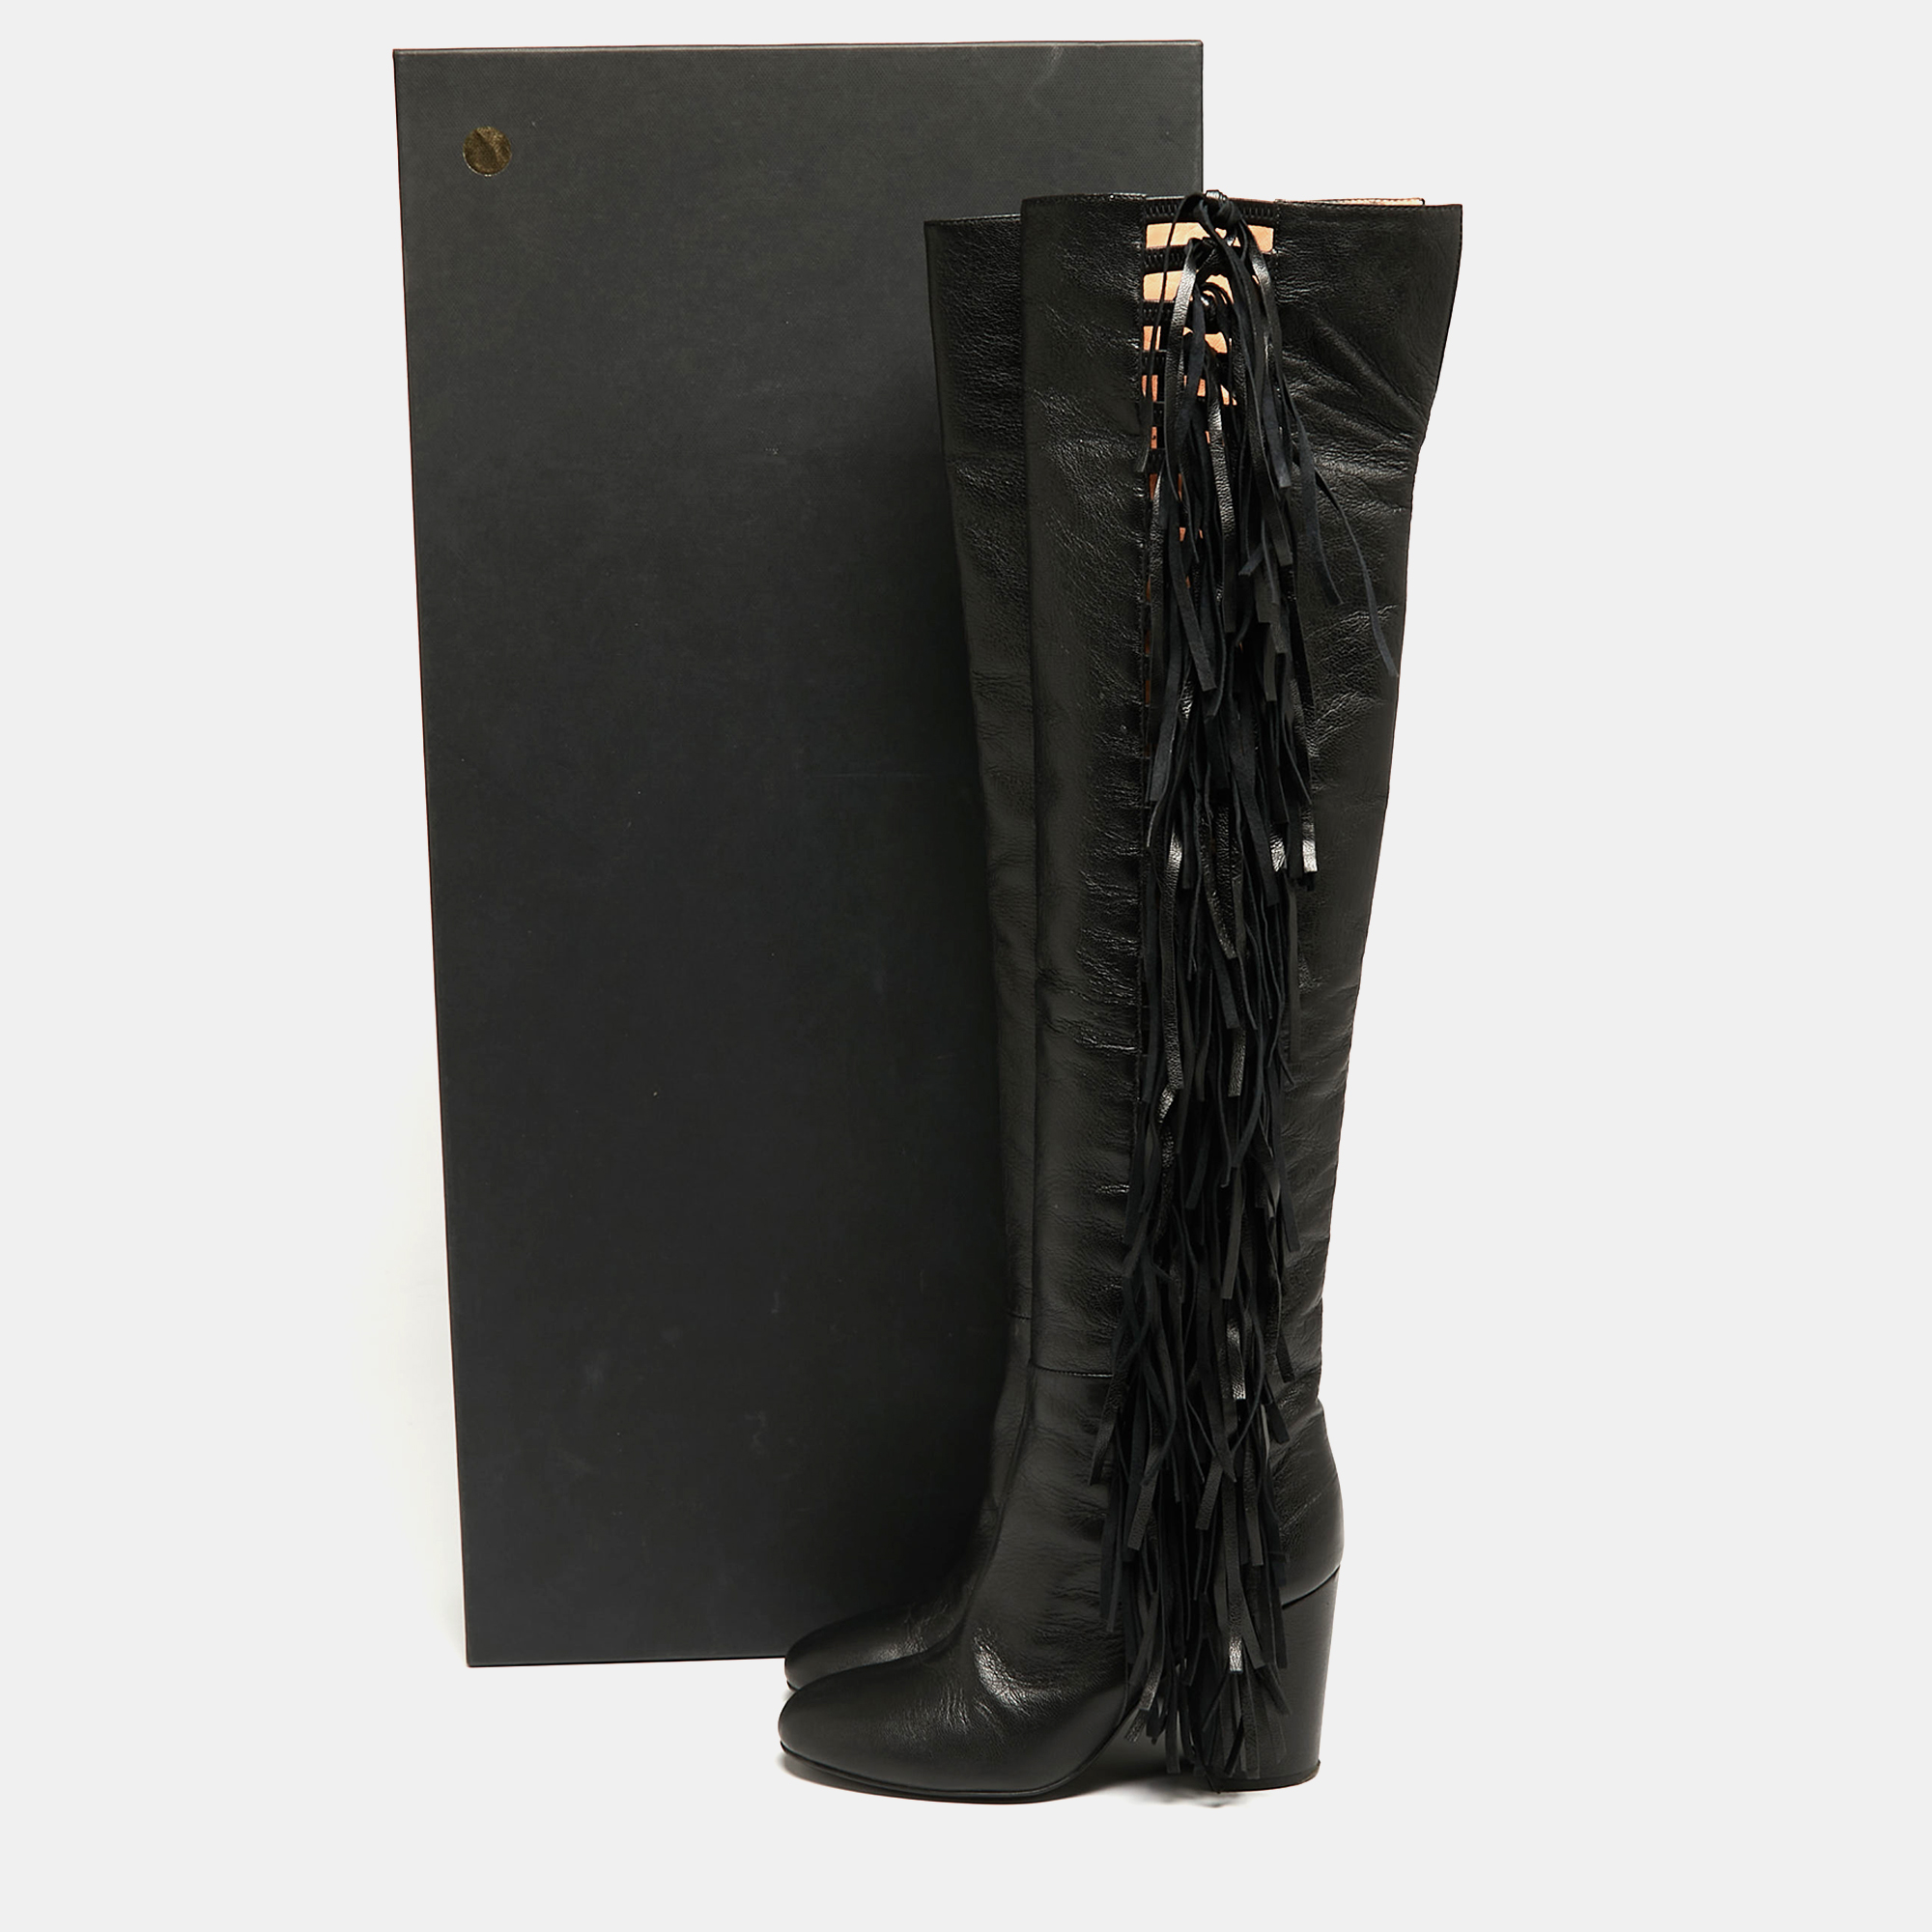 Laurence Dacade Black Leather Cowboy Knee Length Boots Size 38